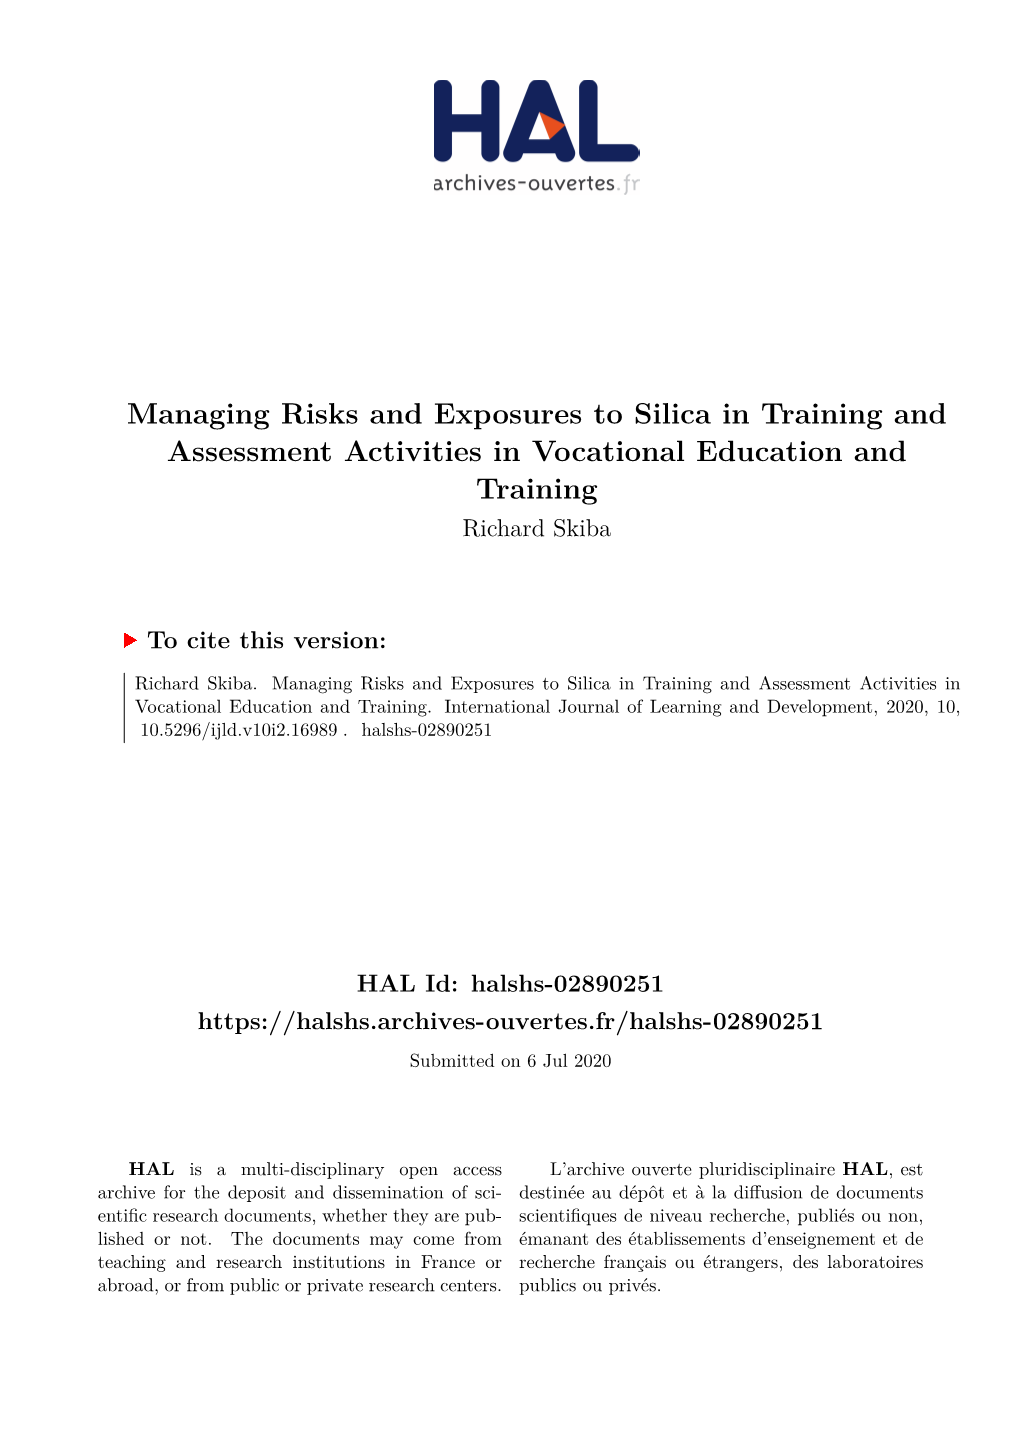 Managing Risks and Exposures to Silica in Training and Assessment Activities in Vocational Education and Training Richard Skiba